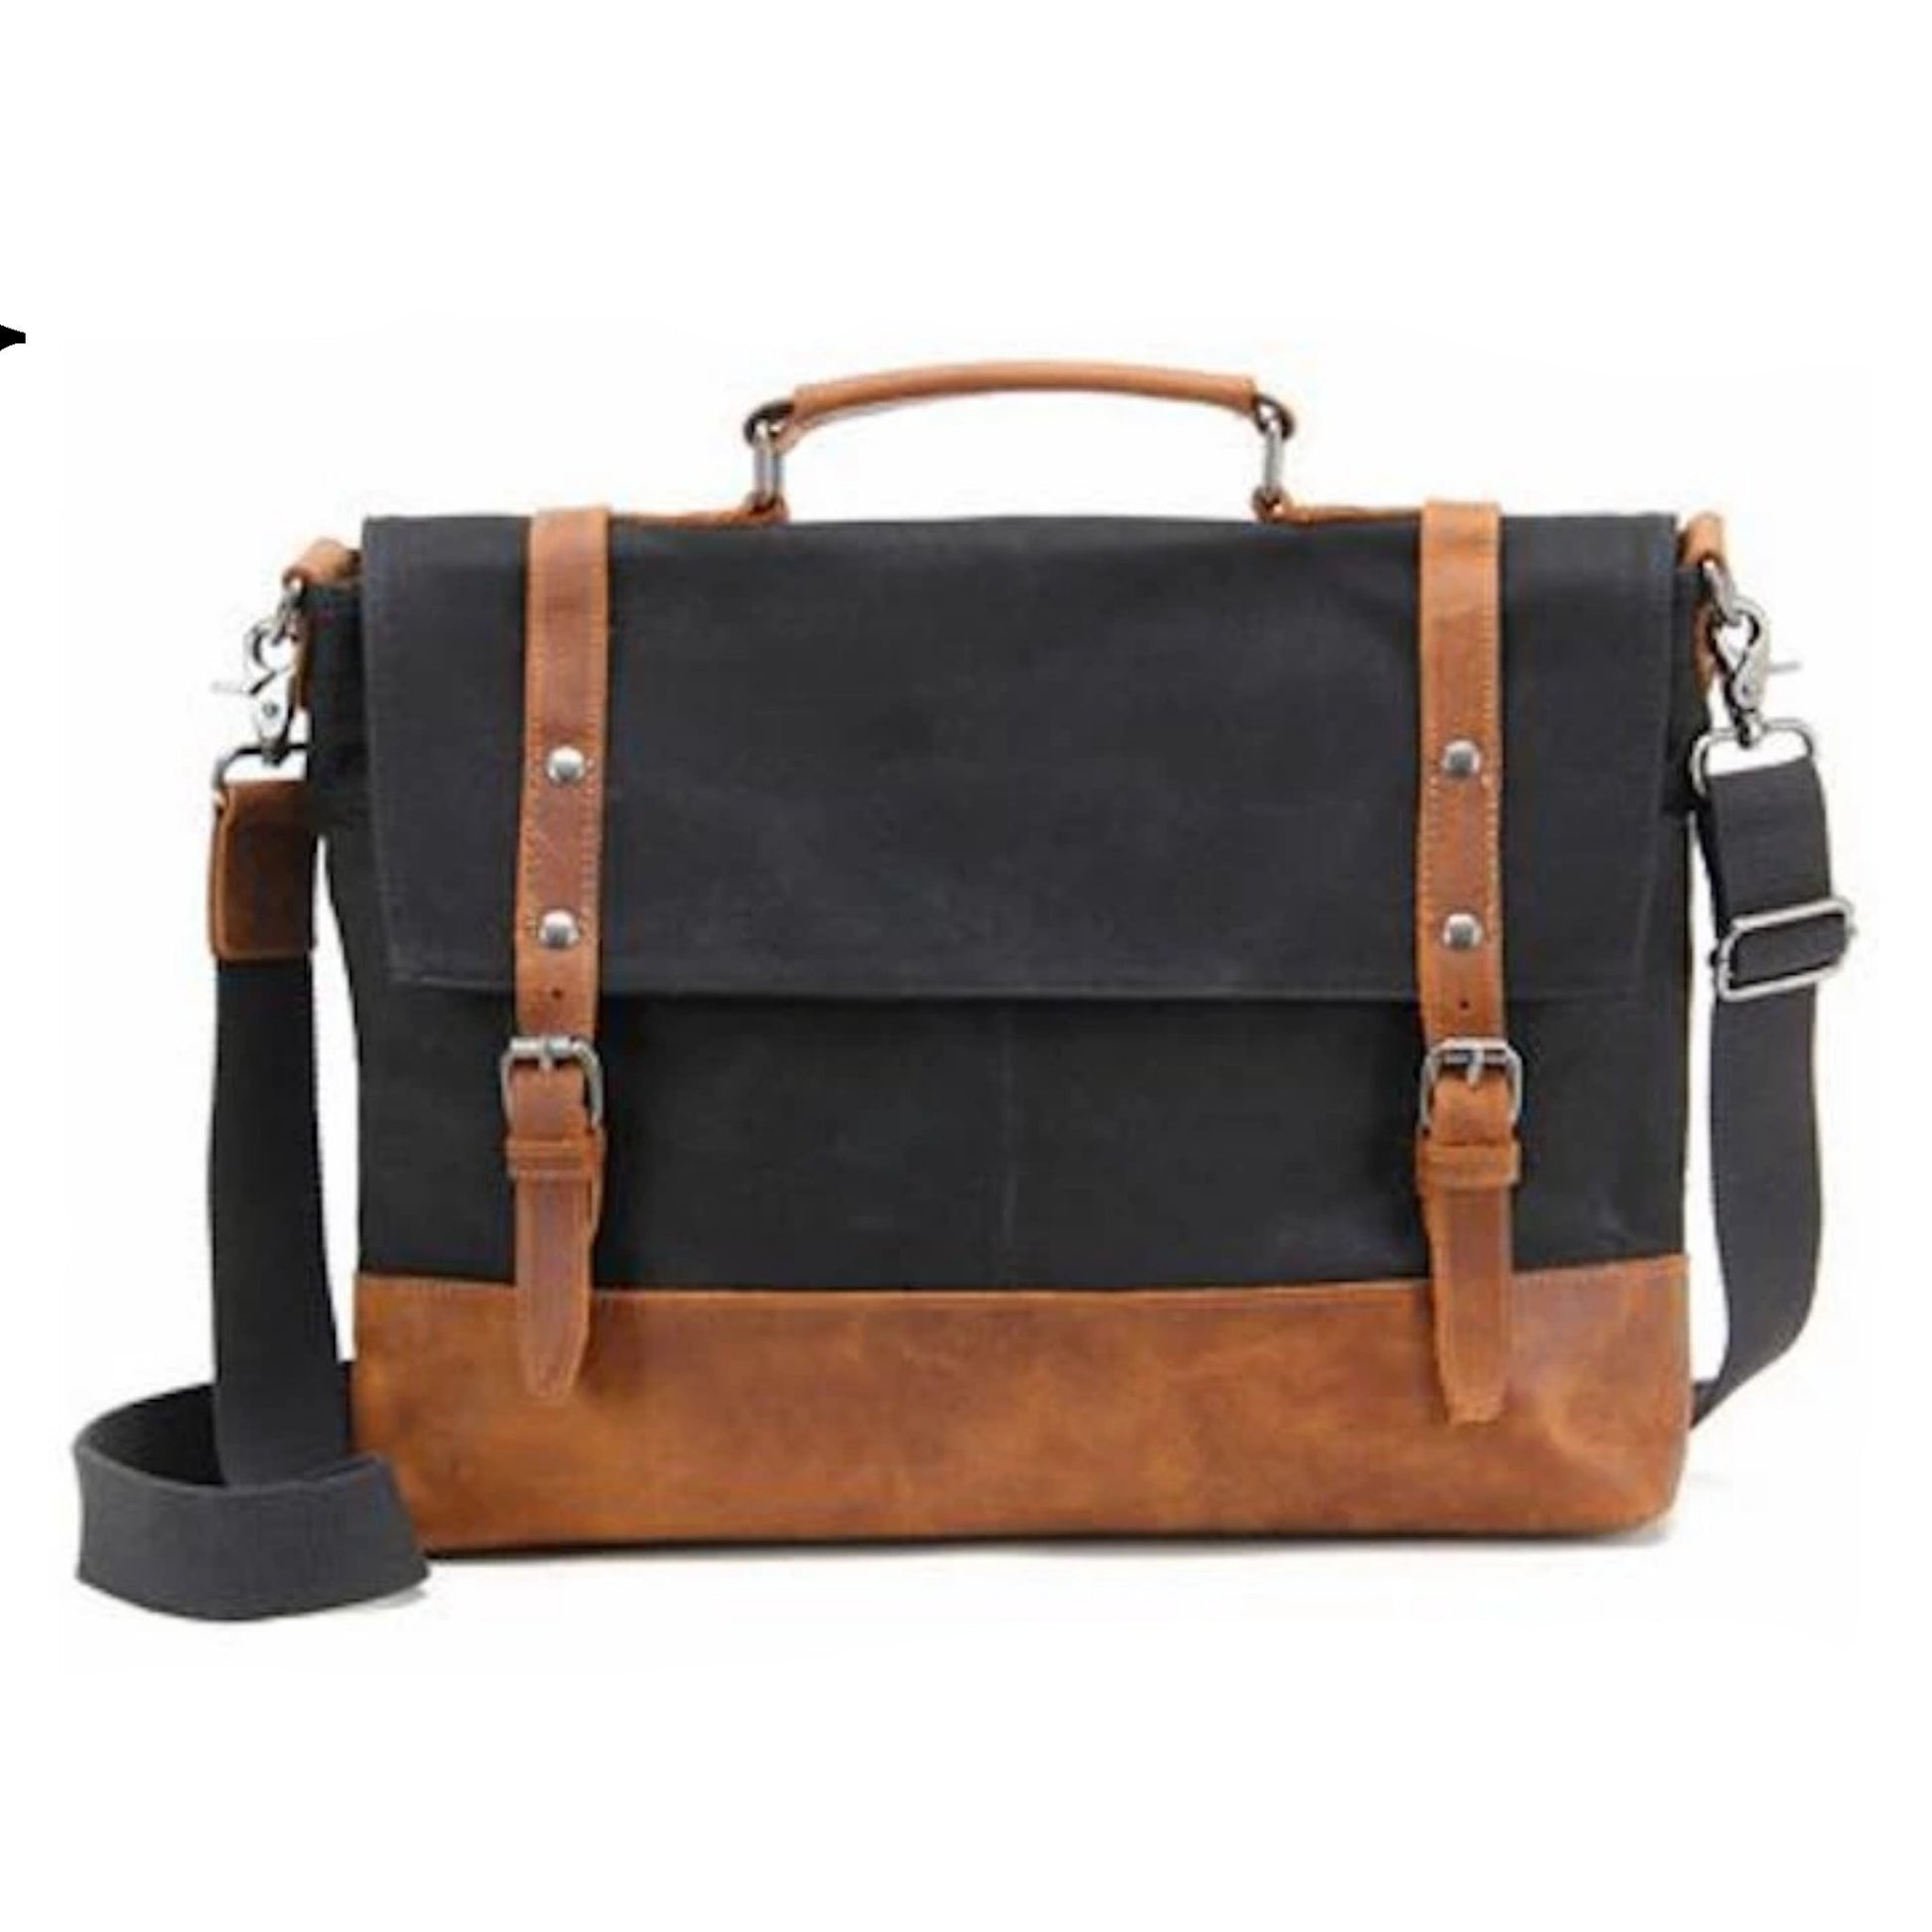 Waxed Canvas with Leather Trim Waterproof Men's Satchel Bag - Blue Sebe Handmade Leather Bags